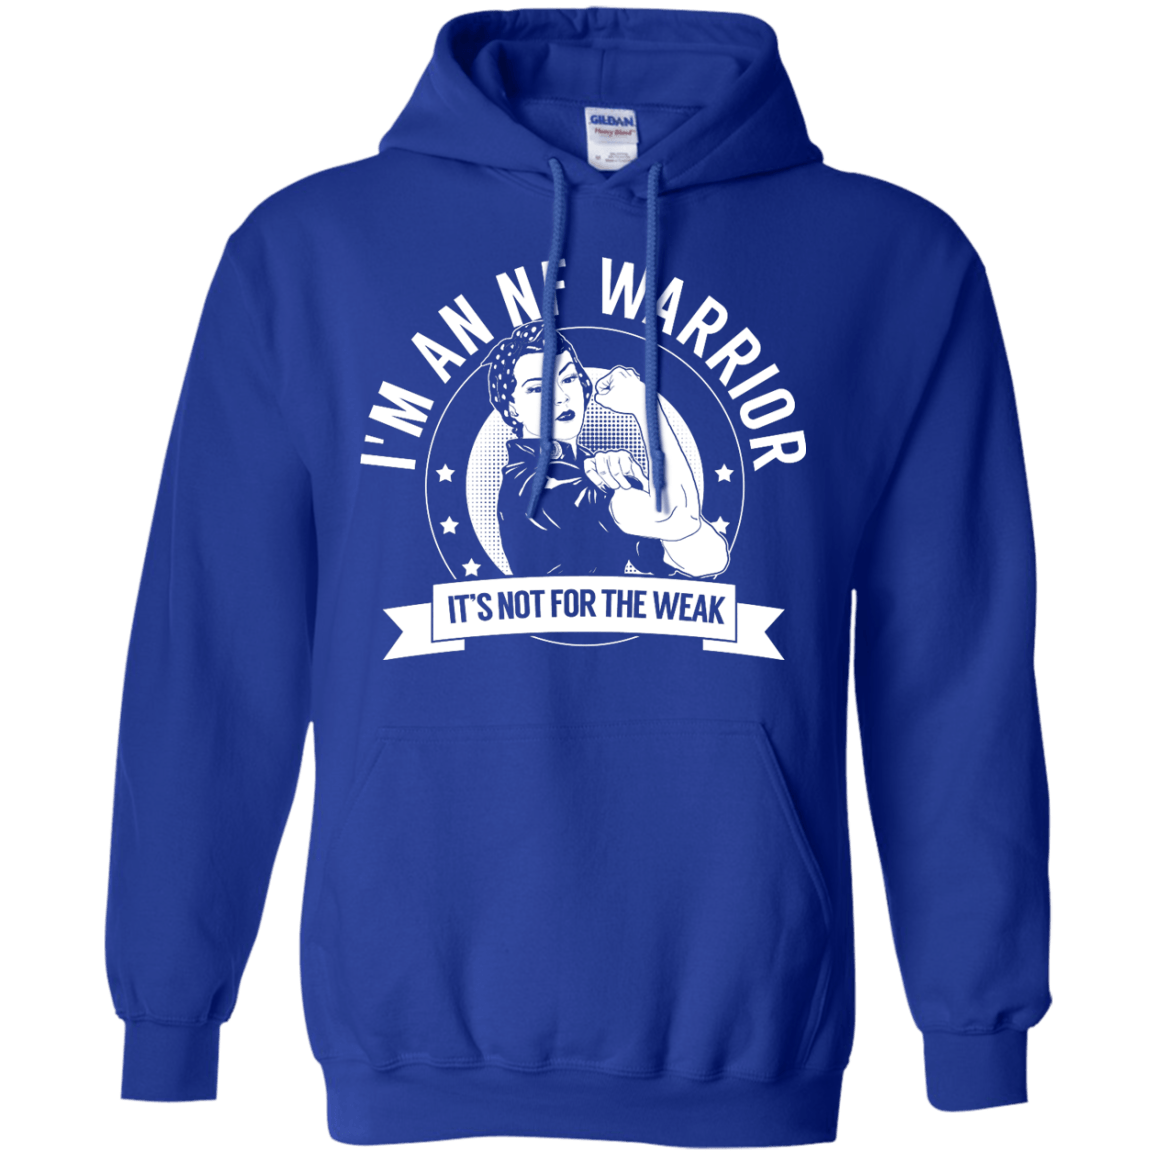 Neurofibromatosis - NF Warrior Not For The Weak Pullover Hoodie 8 oz - The Unchargeables